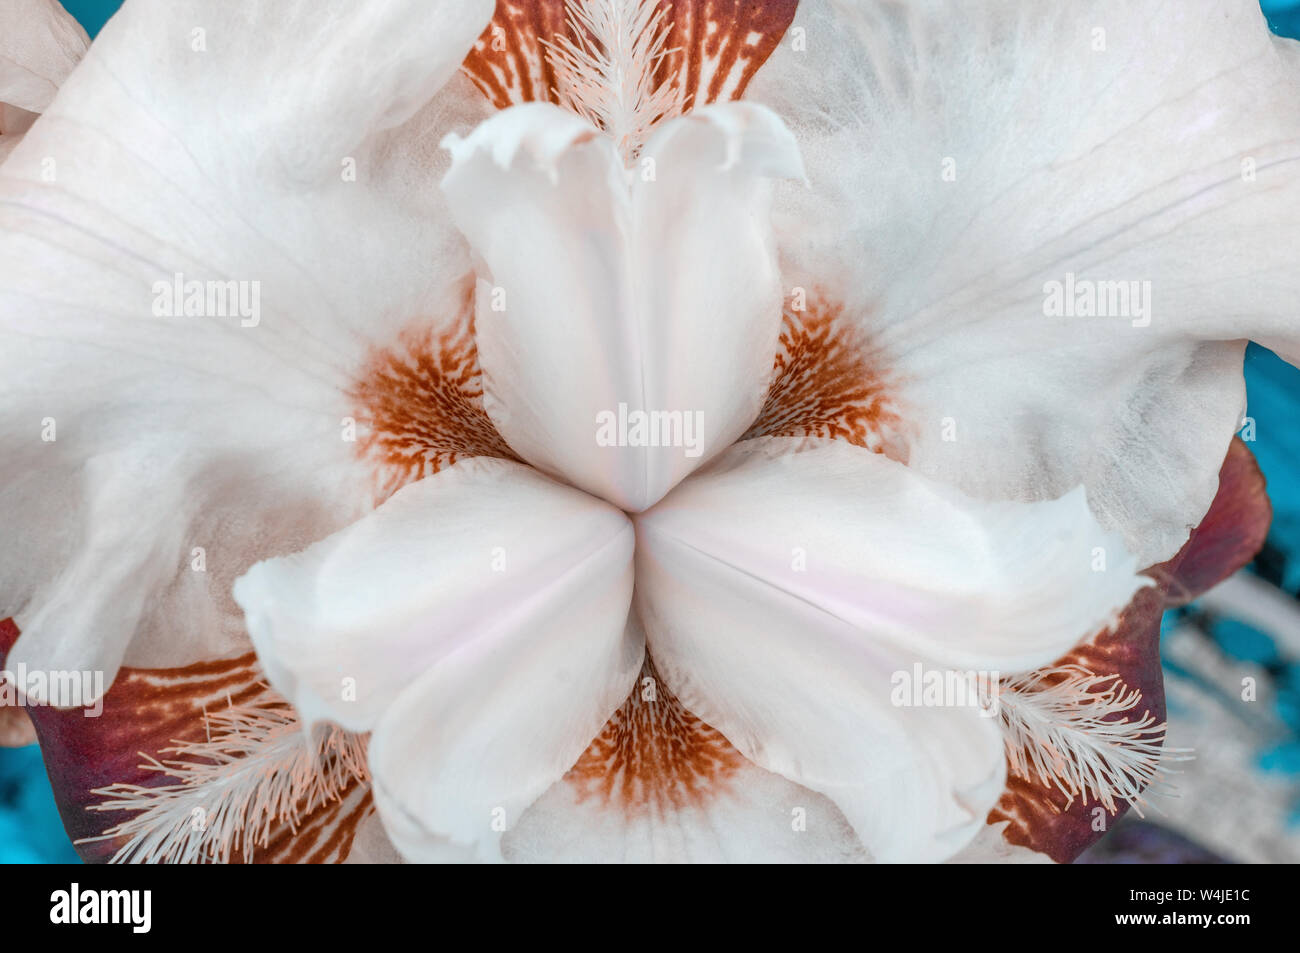 Abstract plant background from the core of a brown iris flower. Close-up, macro photography Stock Photo